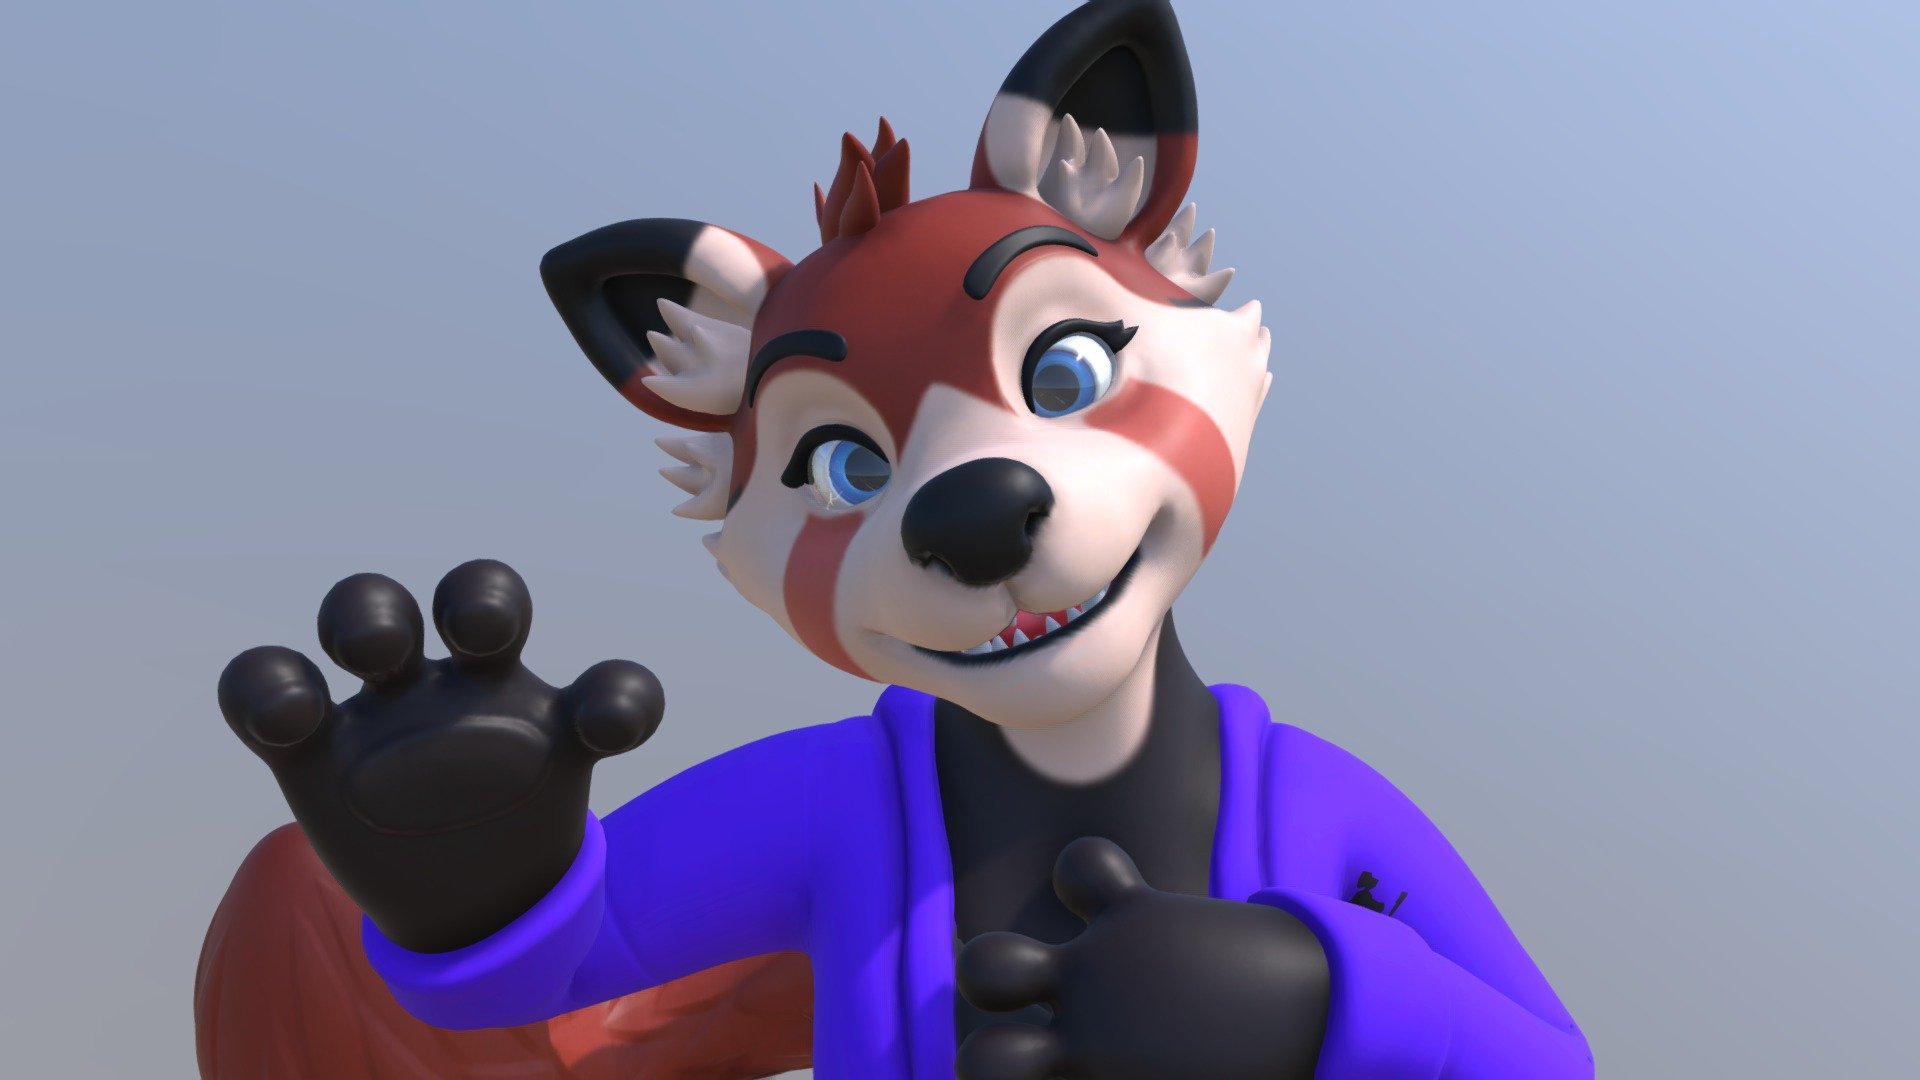 This is Nuki the red panda!
she is a rather humble energetic redpanda who enjoys going on random adventures and discovering new friends on her adventures! - Nuki the redpanda! - 3D model by Lizzy Koopa (@LizzyKoopa) 3d model